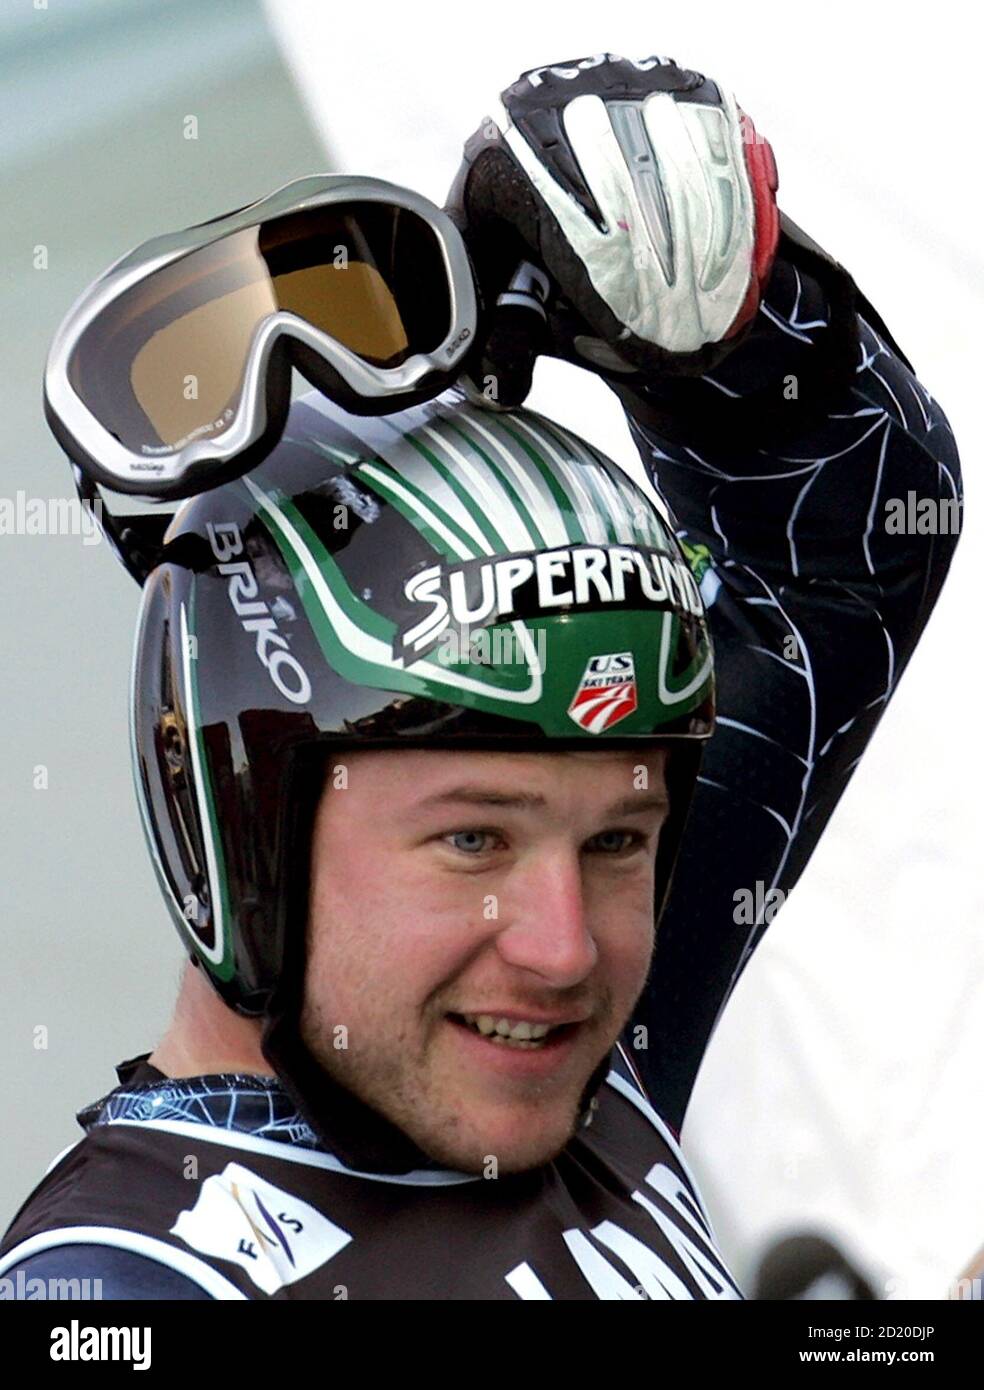 Bode Miller of the United States reacts in the finish area after winning in  the Men's Super-G World Cup, December 15, 2006 in Val Gardena, northern  Italy. REUTERS/Alessandro Bianchi (ITALY Fotografía de